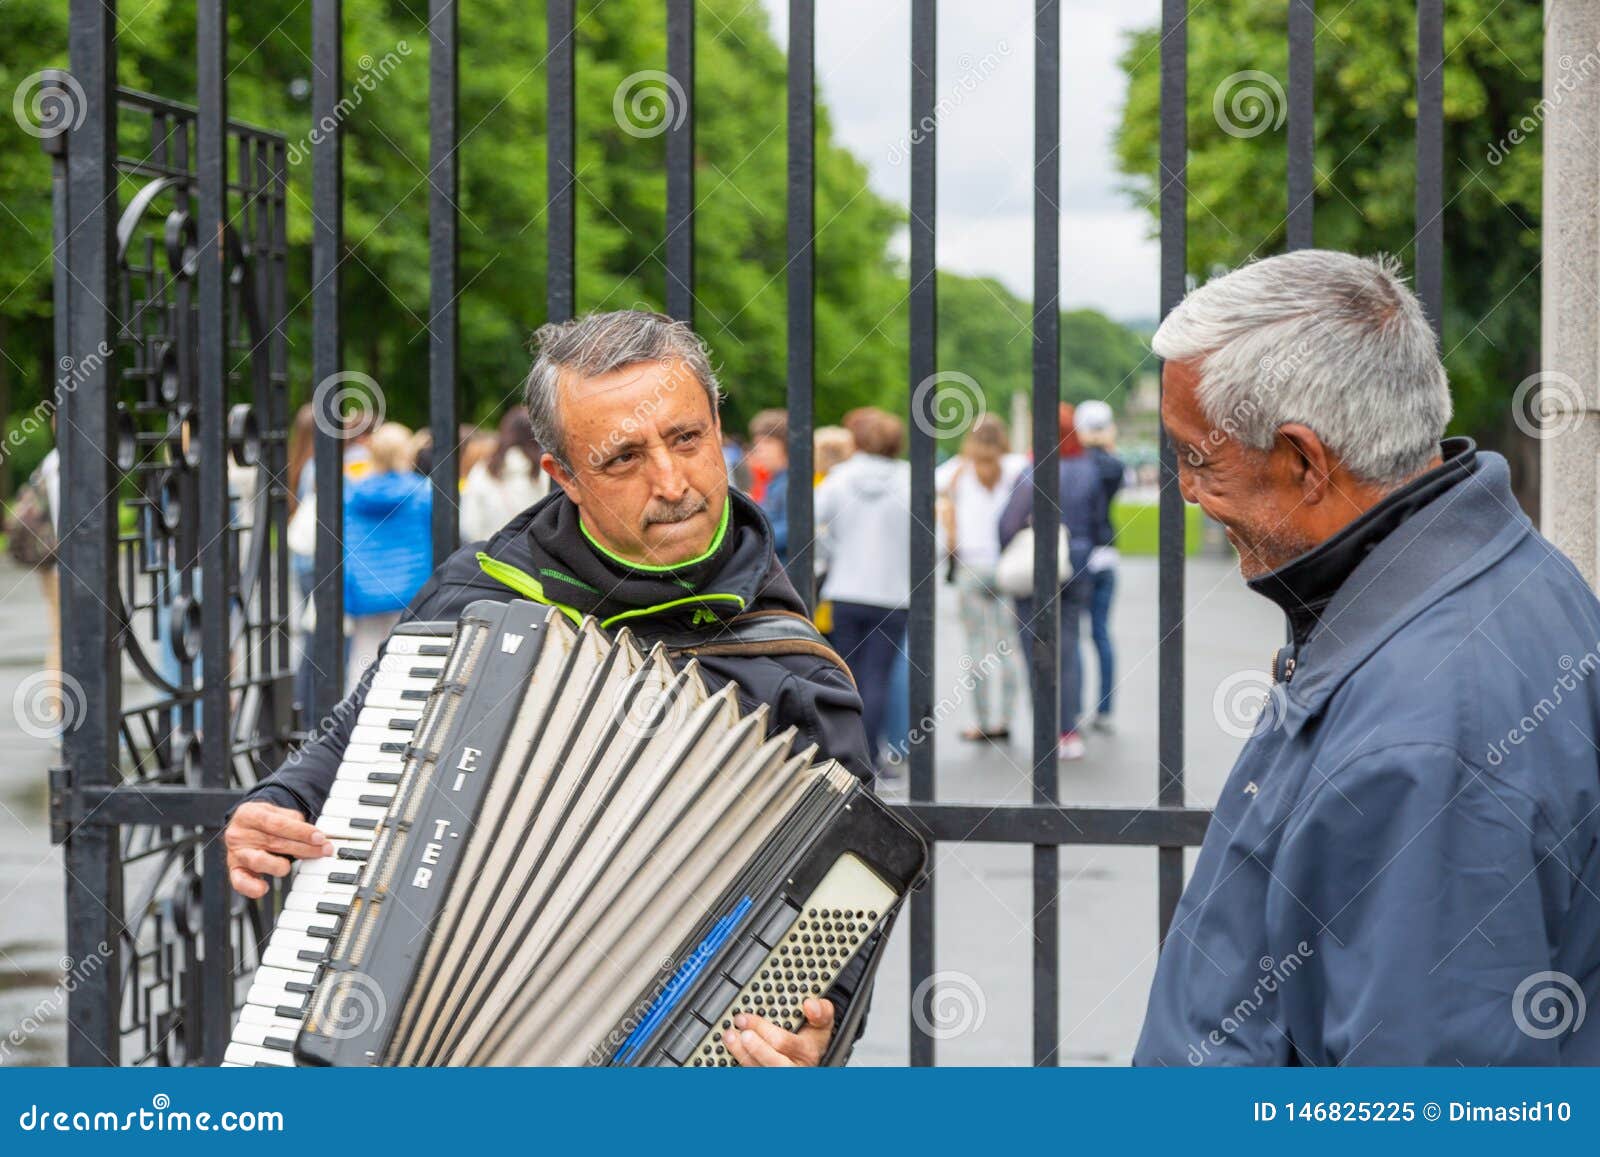 Street Musician Plays the Accordion at Street Editorial Image - Image